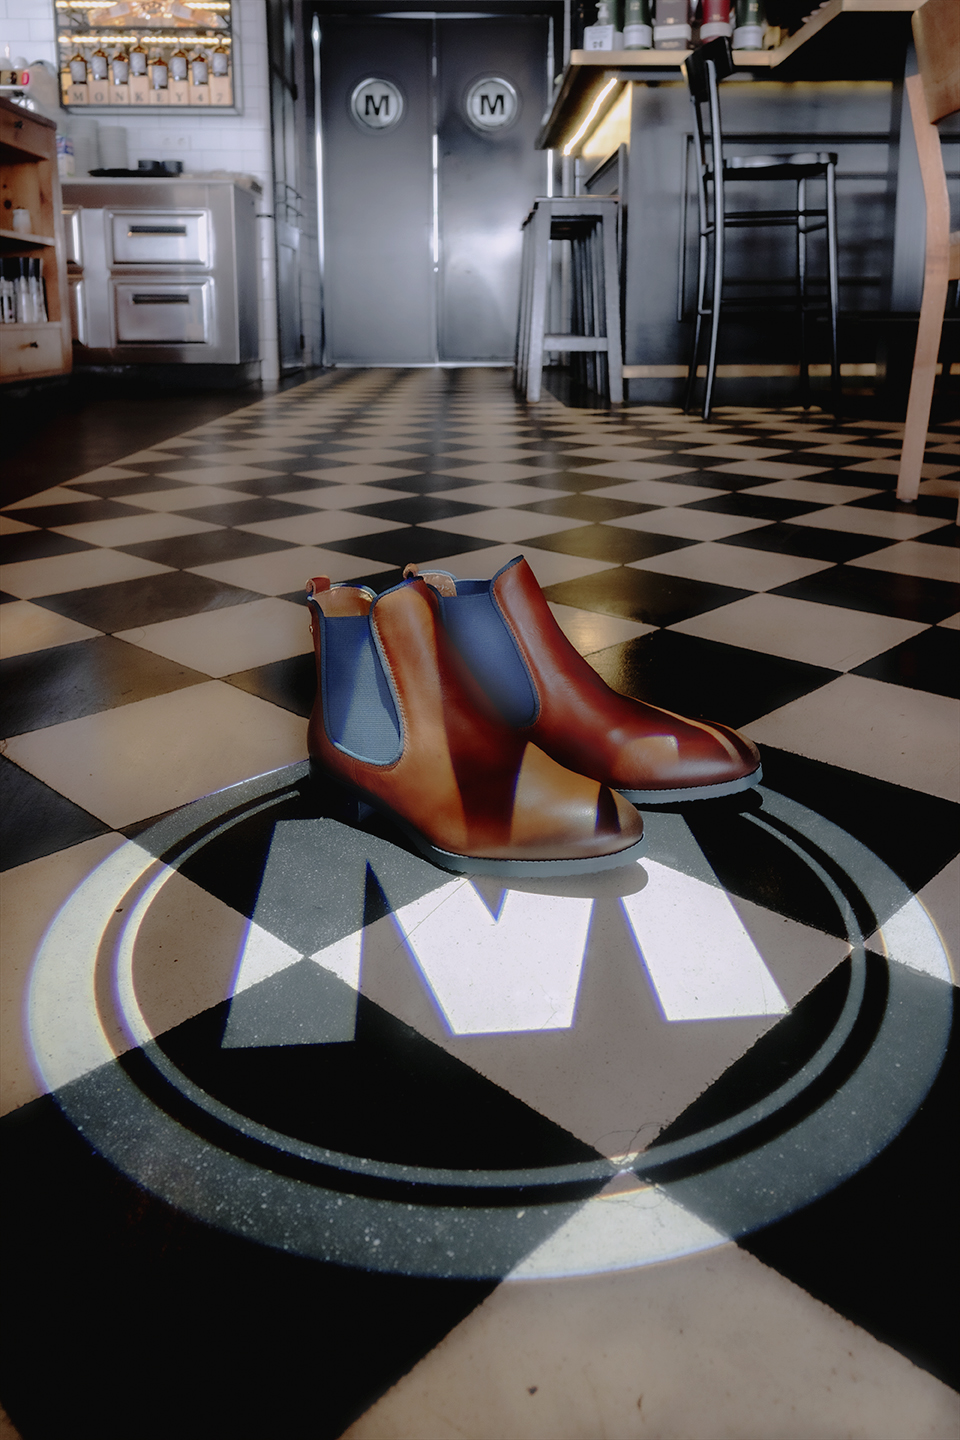 Image of a pair of women's brown ankle boots on the floor of the Moments restaurant